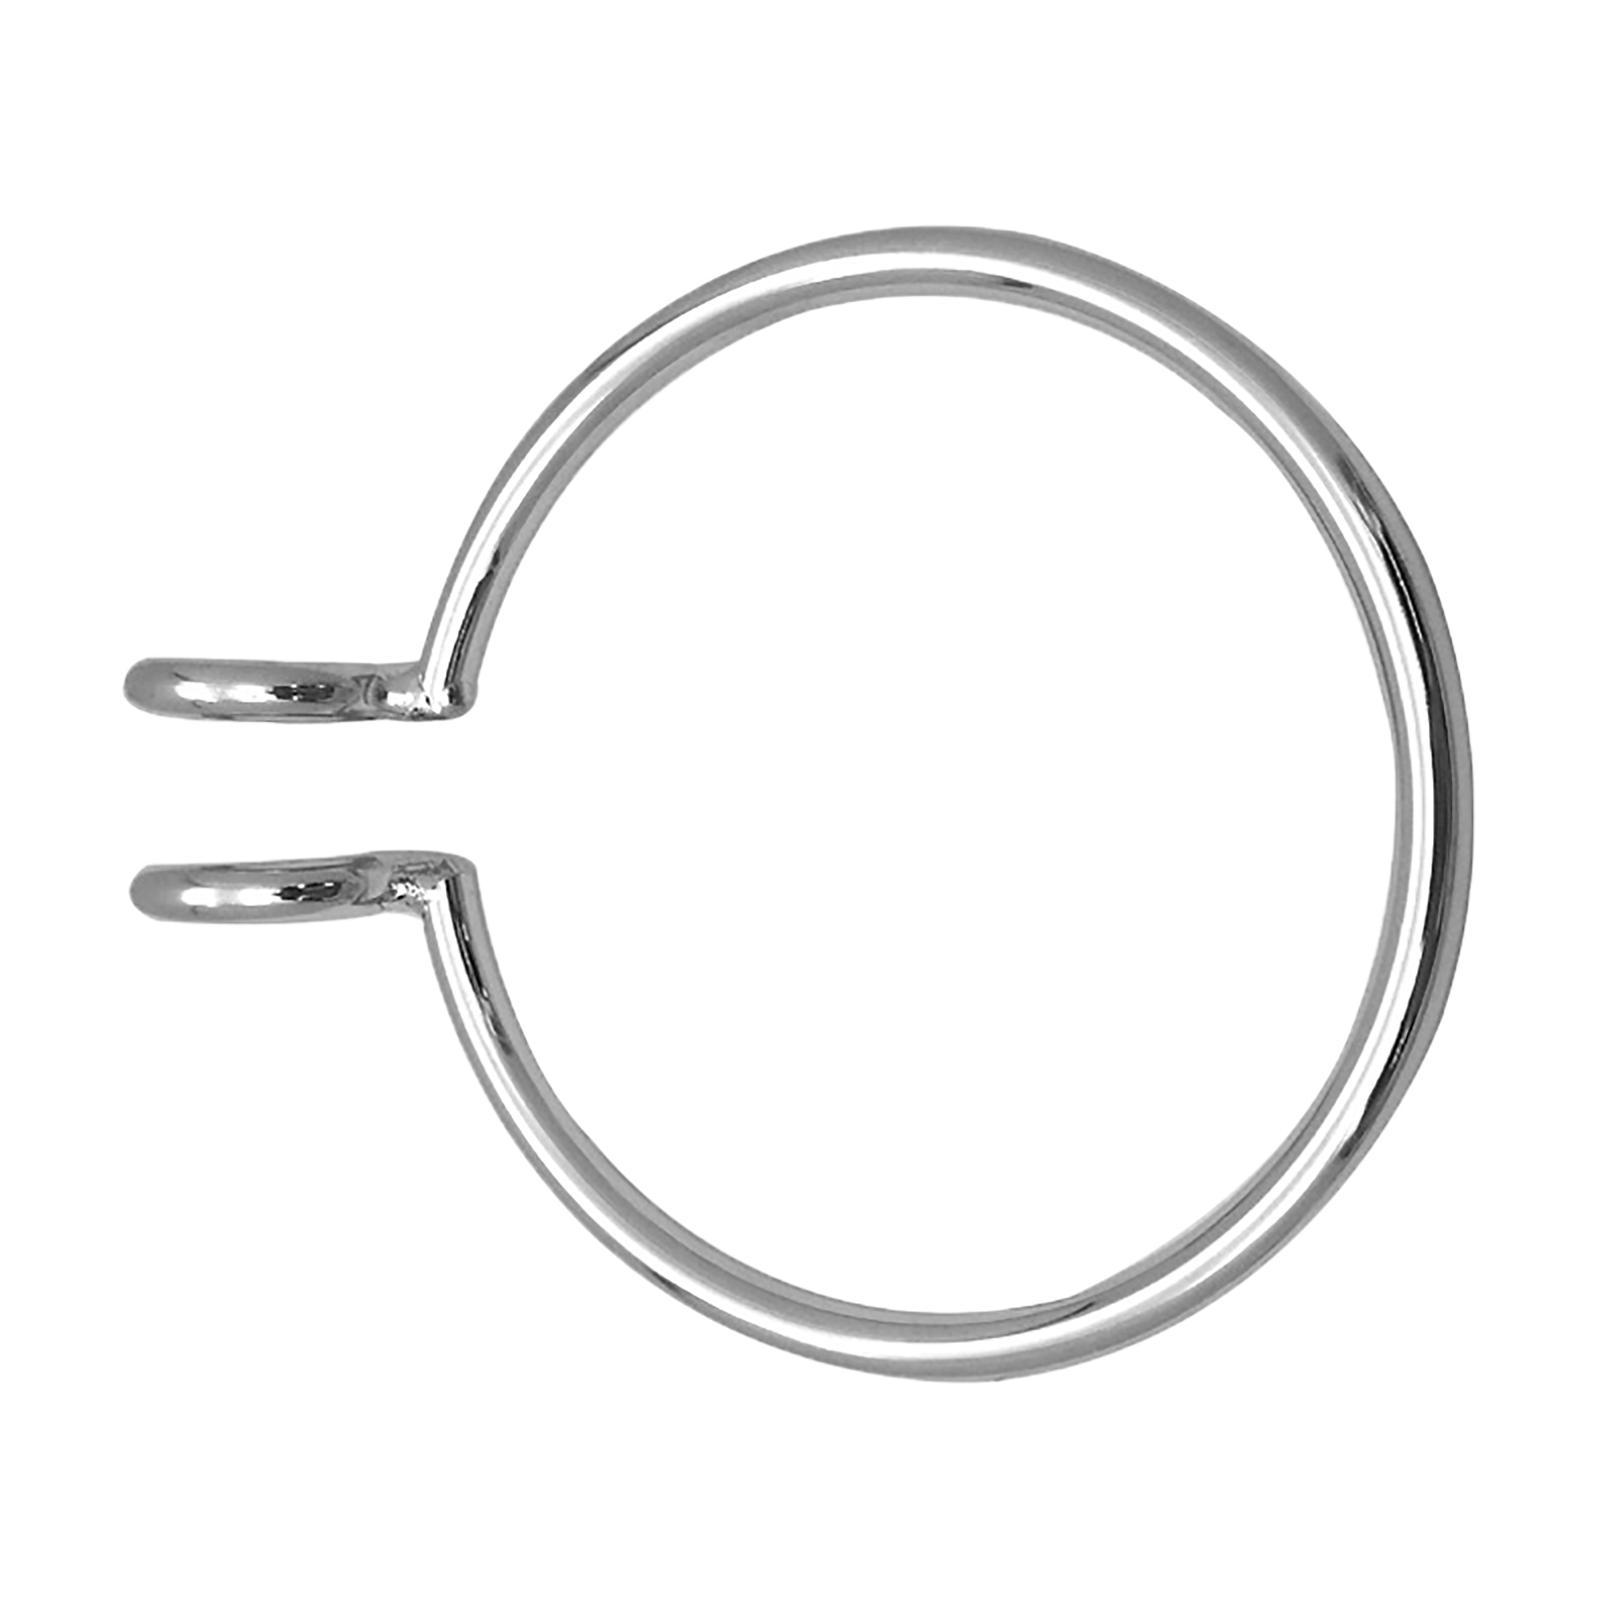 Anchor Retrieval Ring 8mm for Yacht Fishing Simple to Use Marine Sturdy 0.3 inch Diameter Accessories Easy to Install Premium Durable Solid